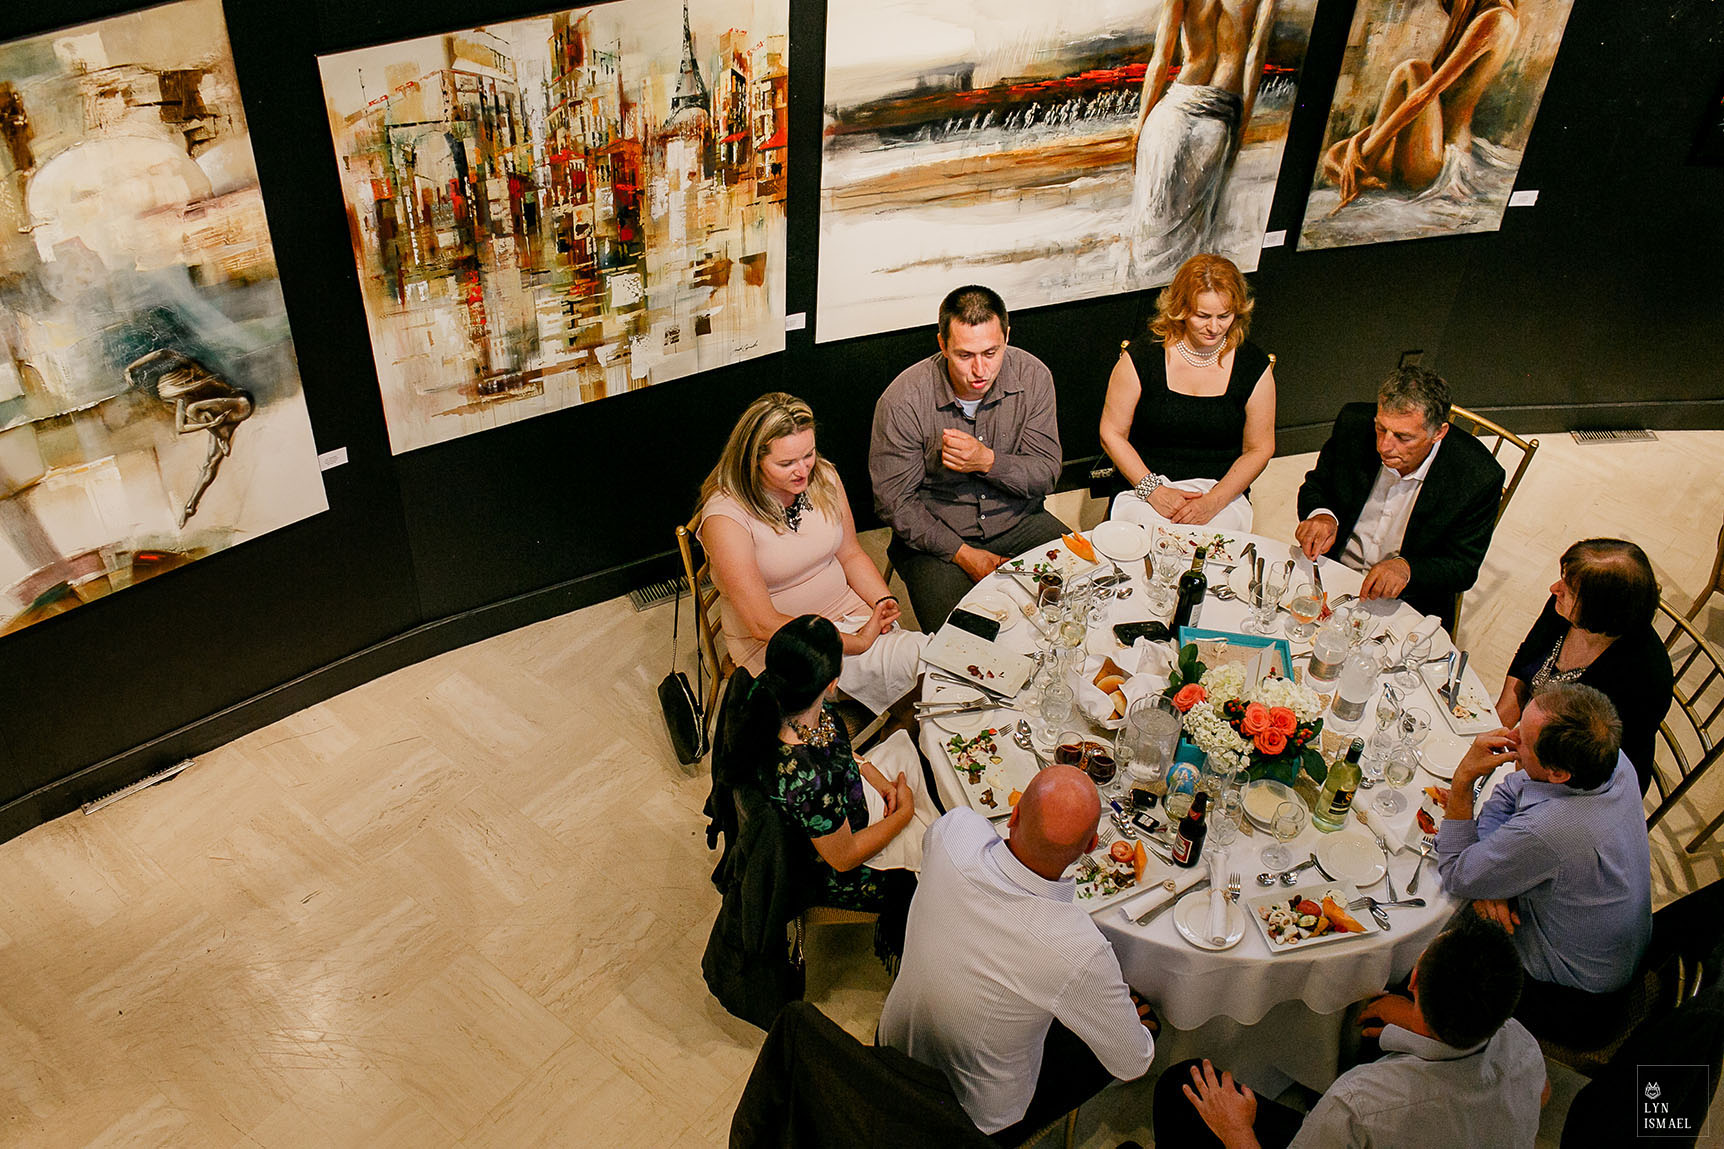 Guests eating dinner surrounded by art works at the Joseph D Carrier art gallery